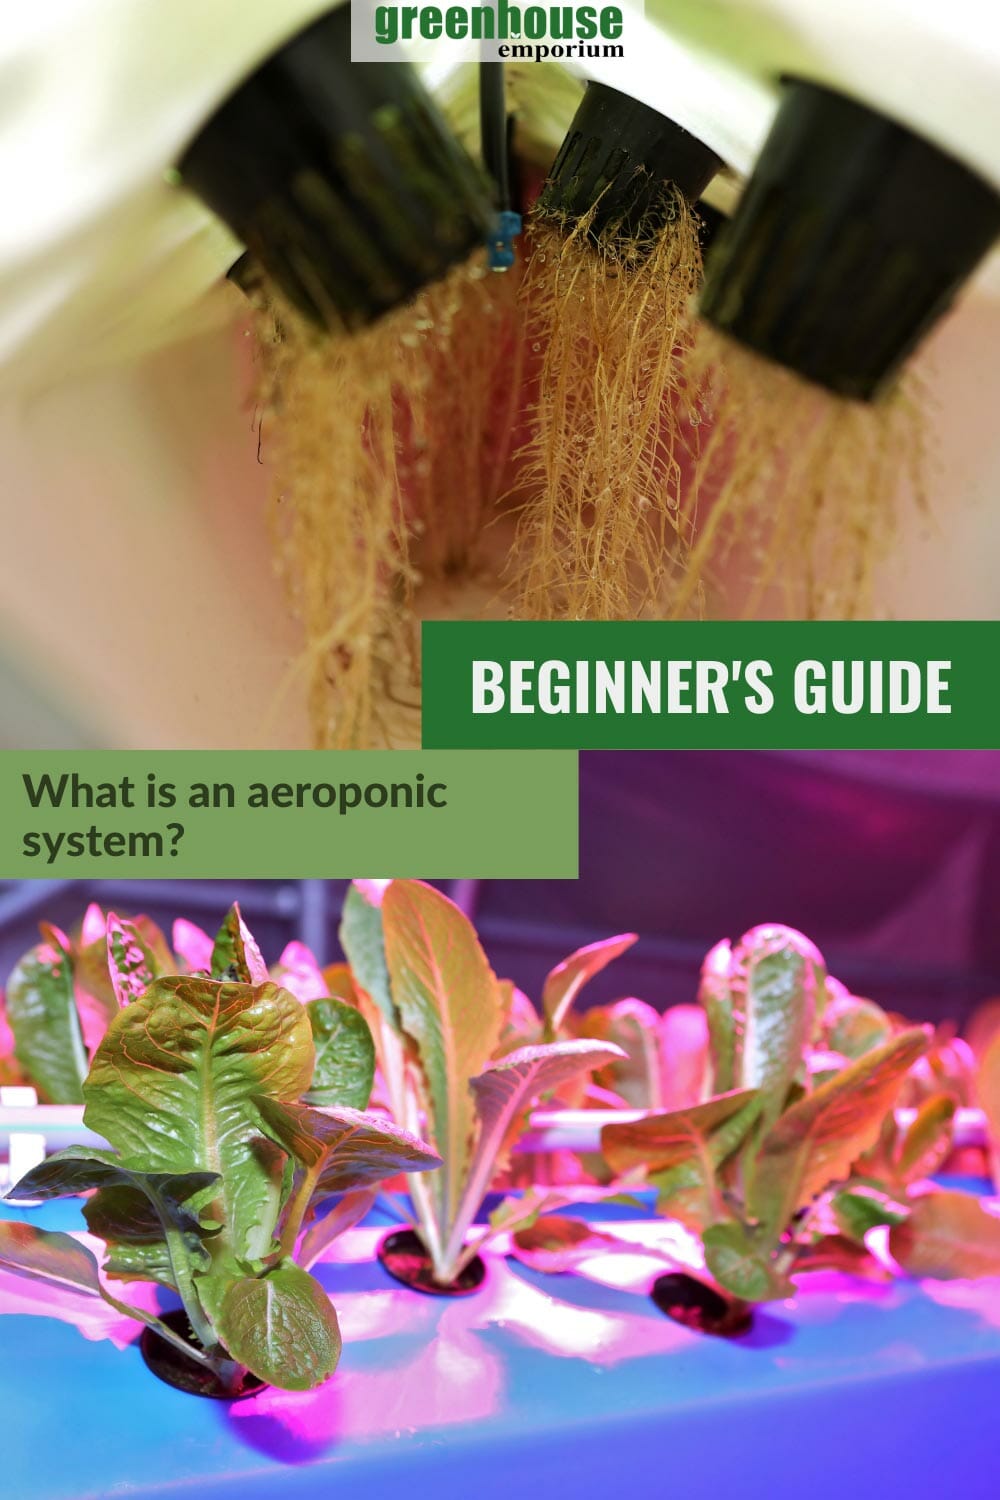 Pots with exposed roots in an aeroponic box and plants growing out of blue box with the text: Beginner's Guide - What are aeroponic systems?